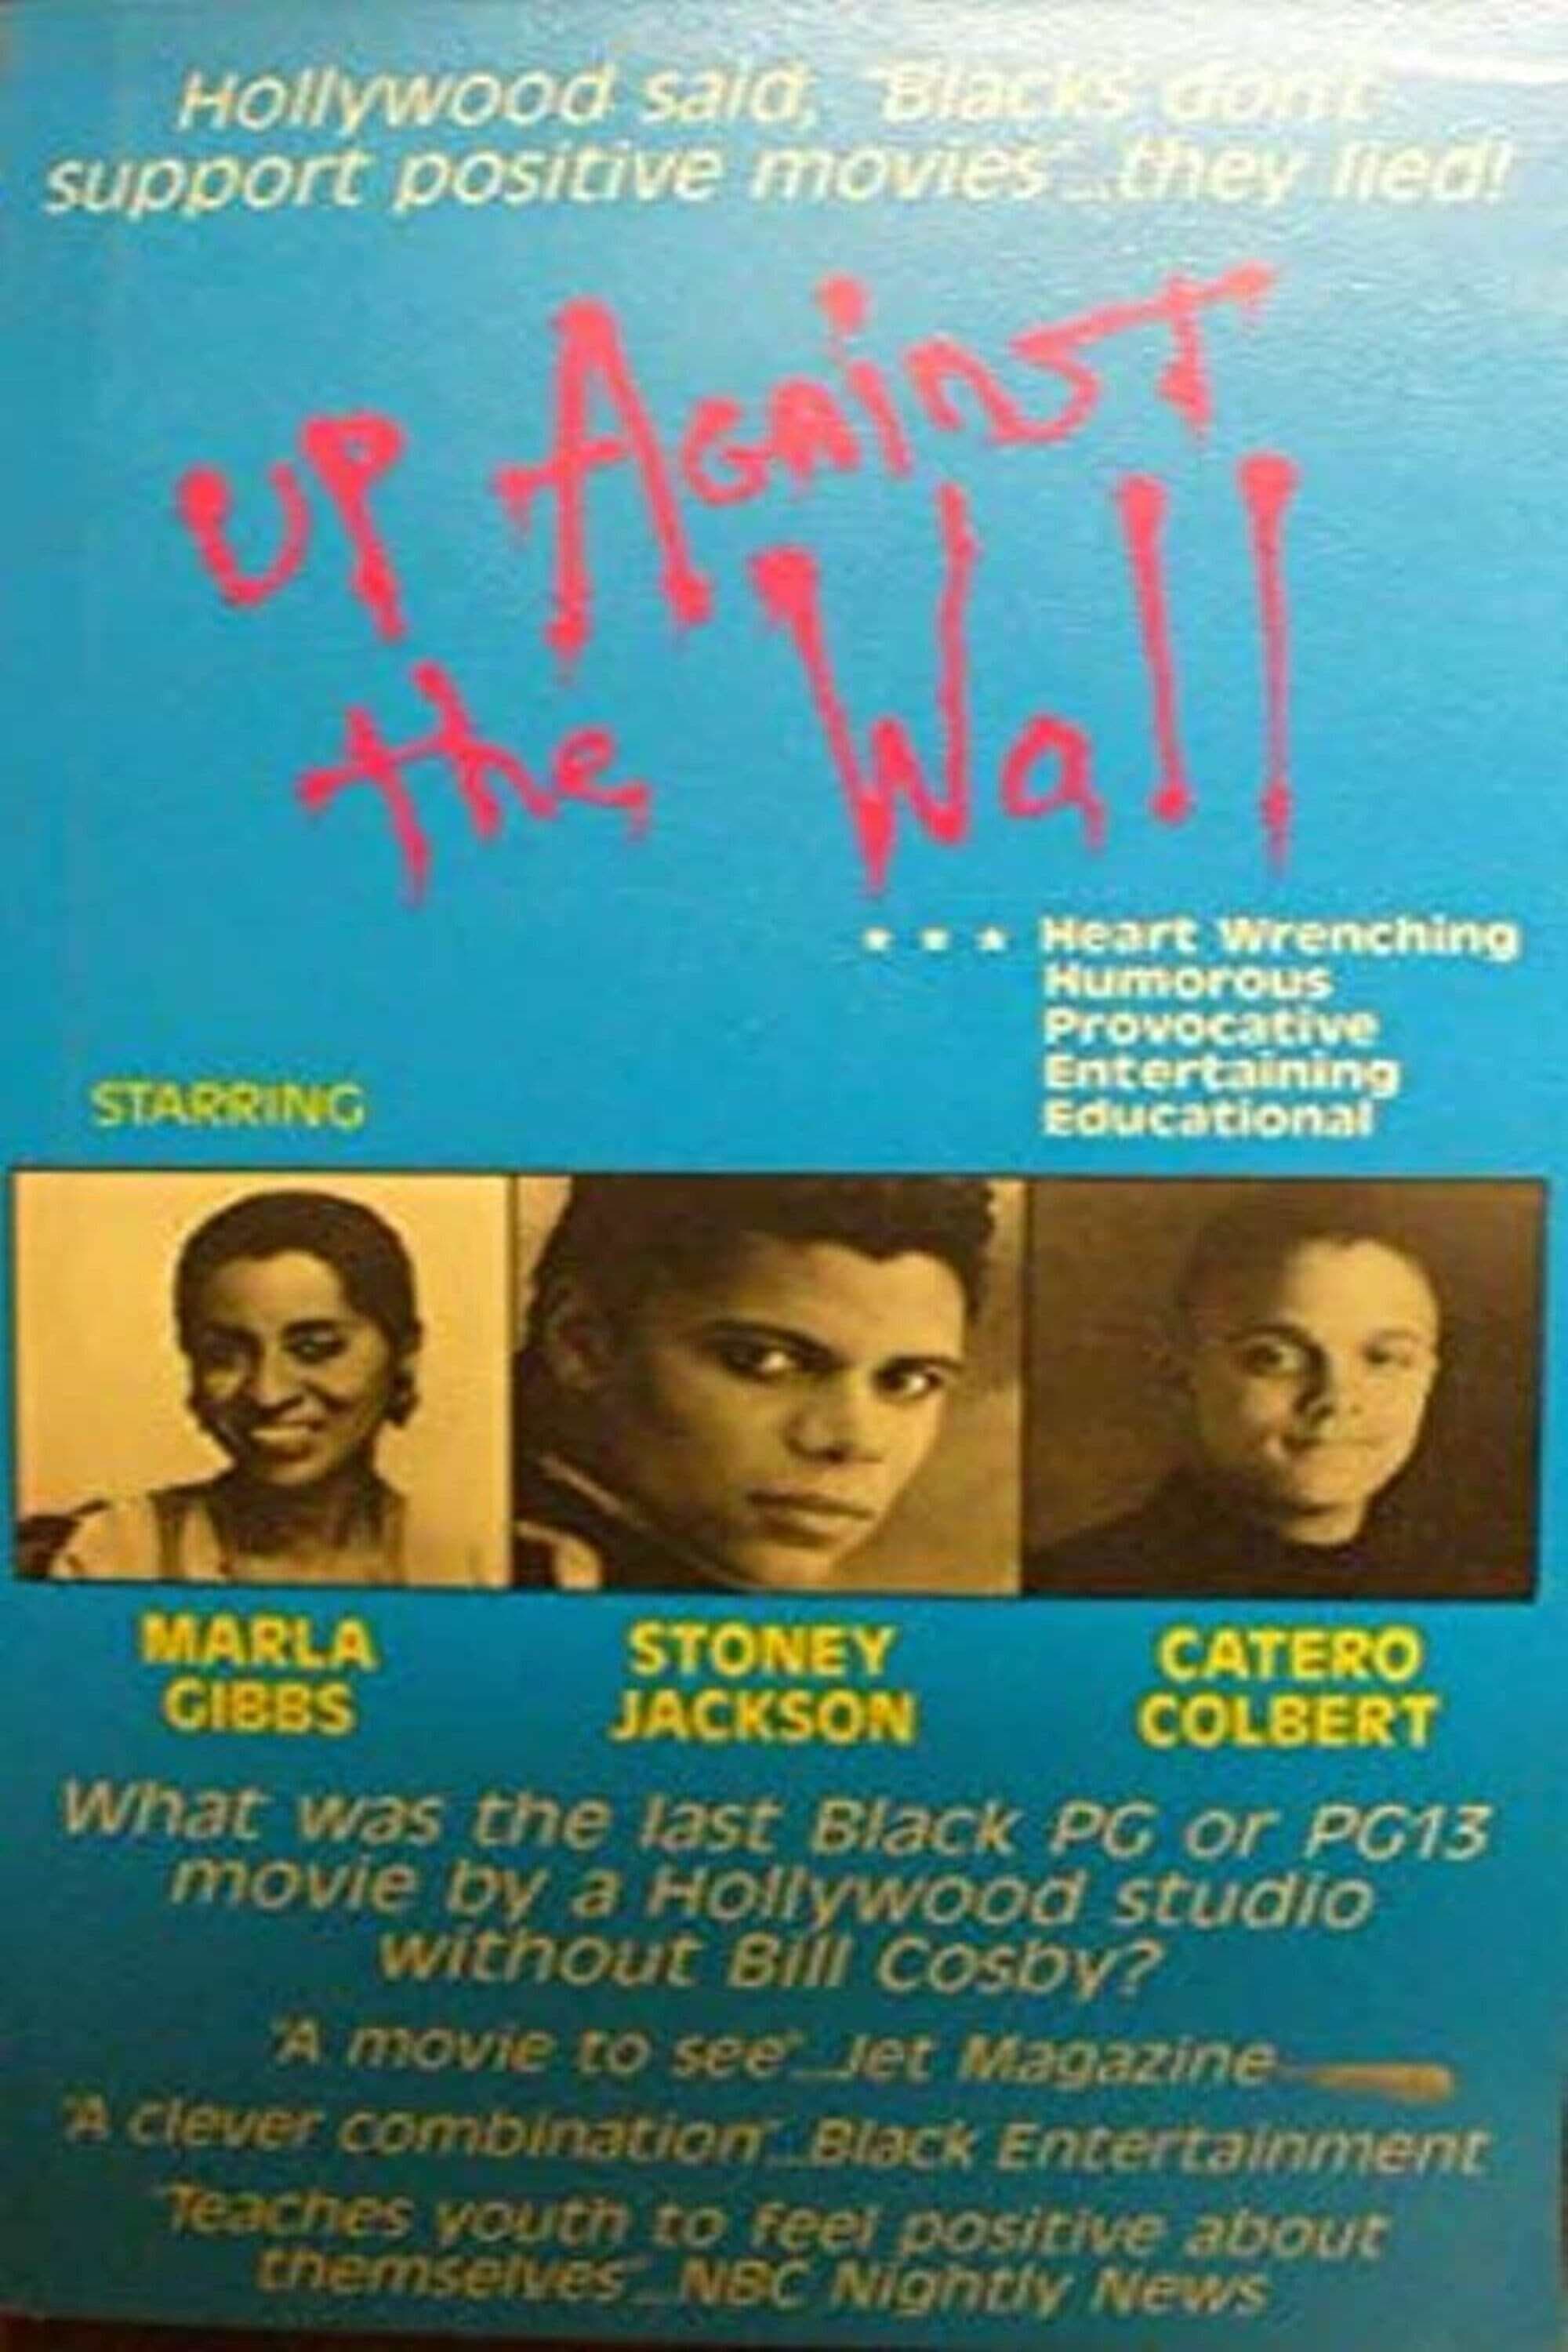 Up Against the Wall (1991)